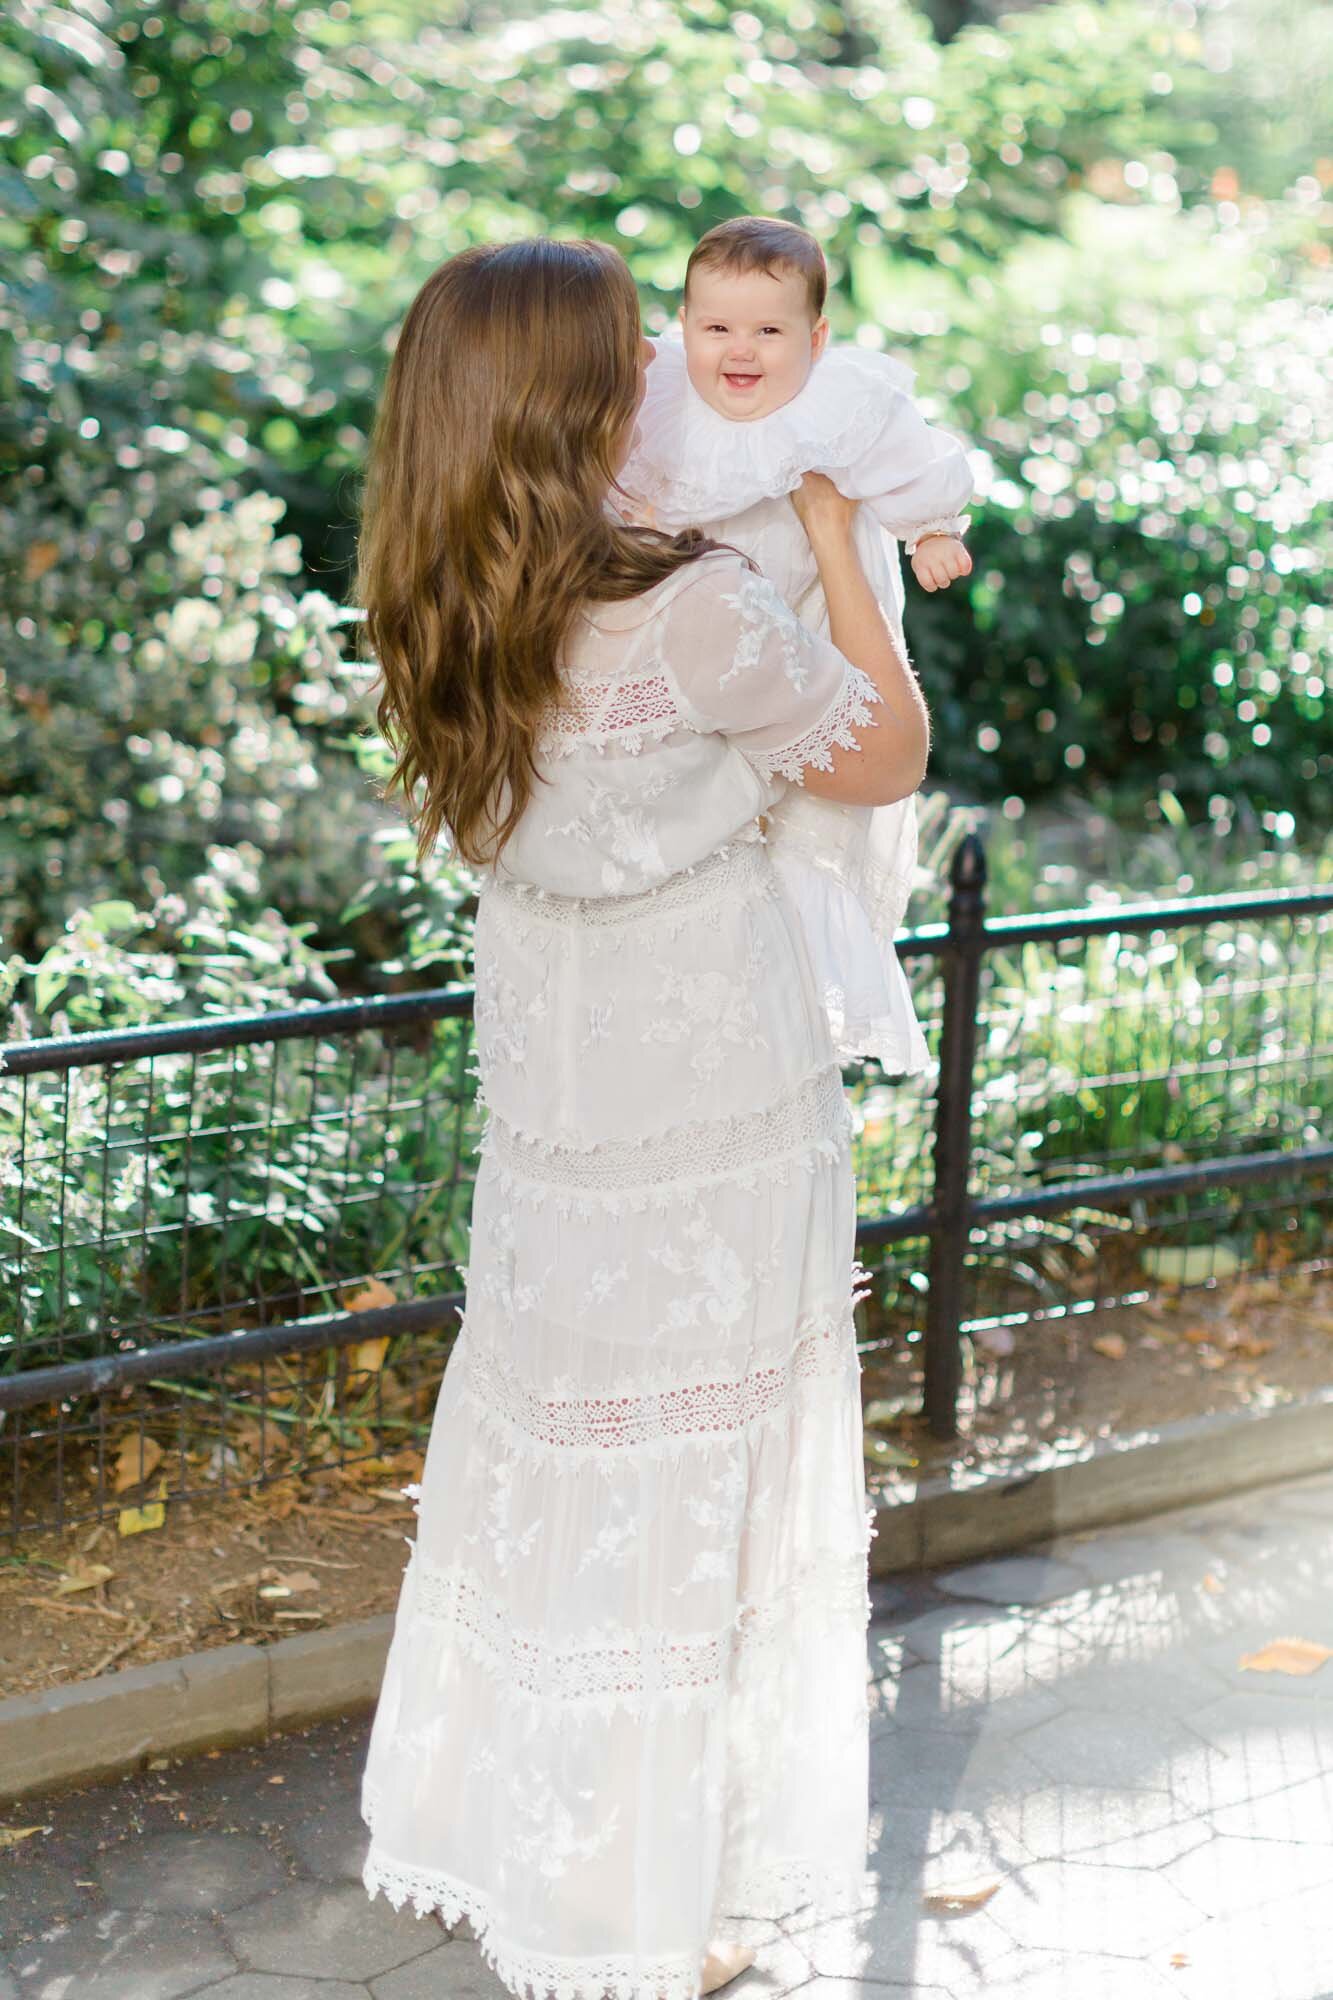 Madison Square Park family photography session by top NYC family photographer, Jacqueline Clair